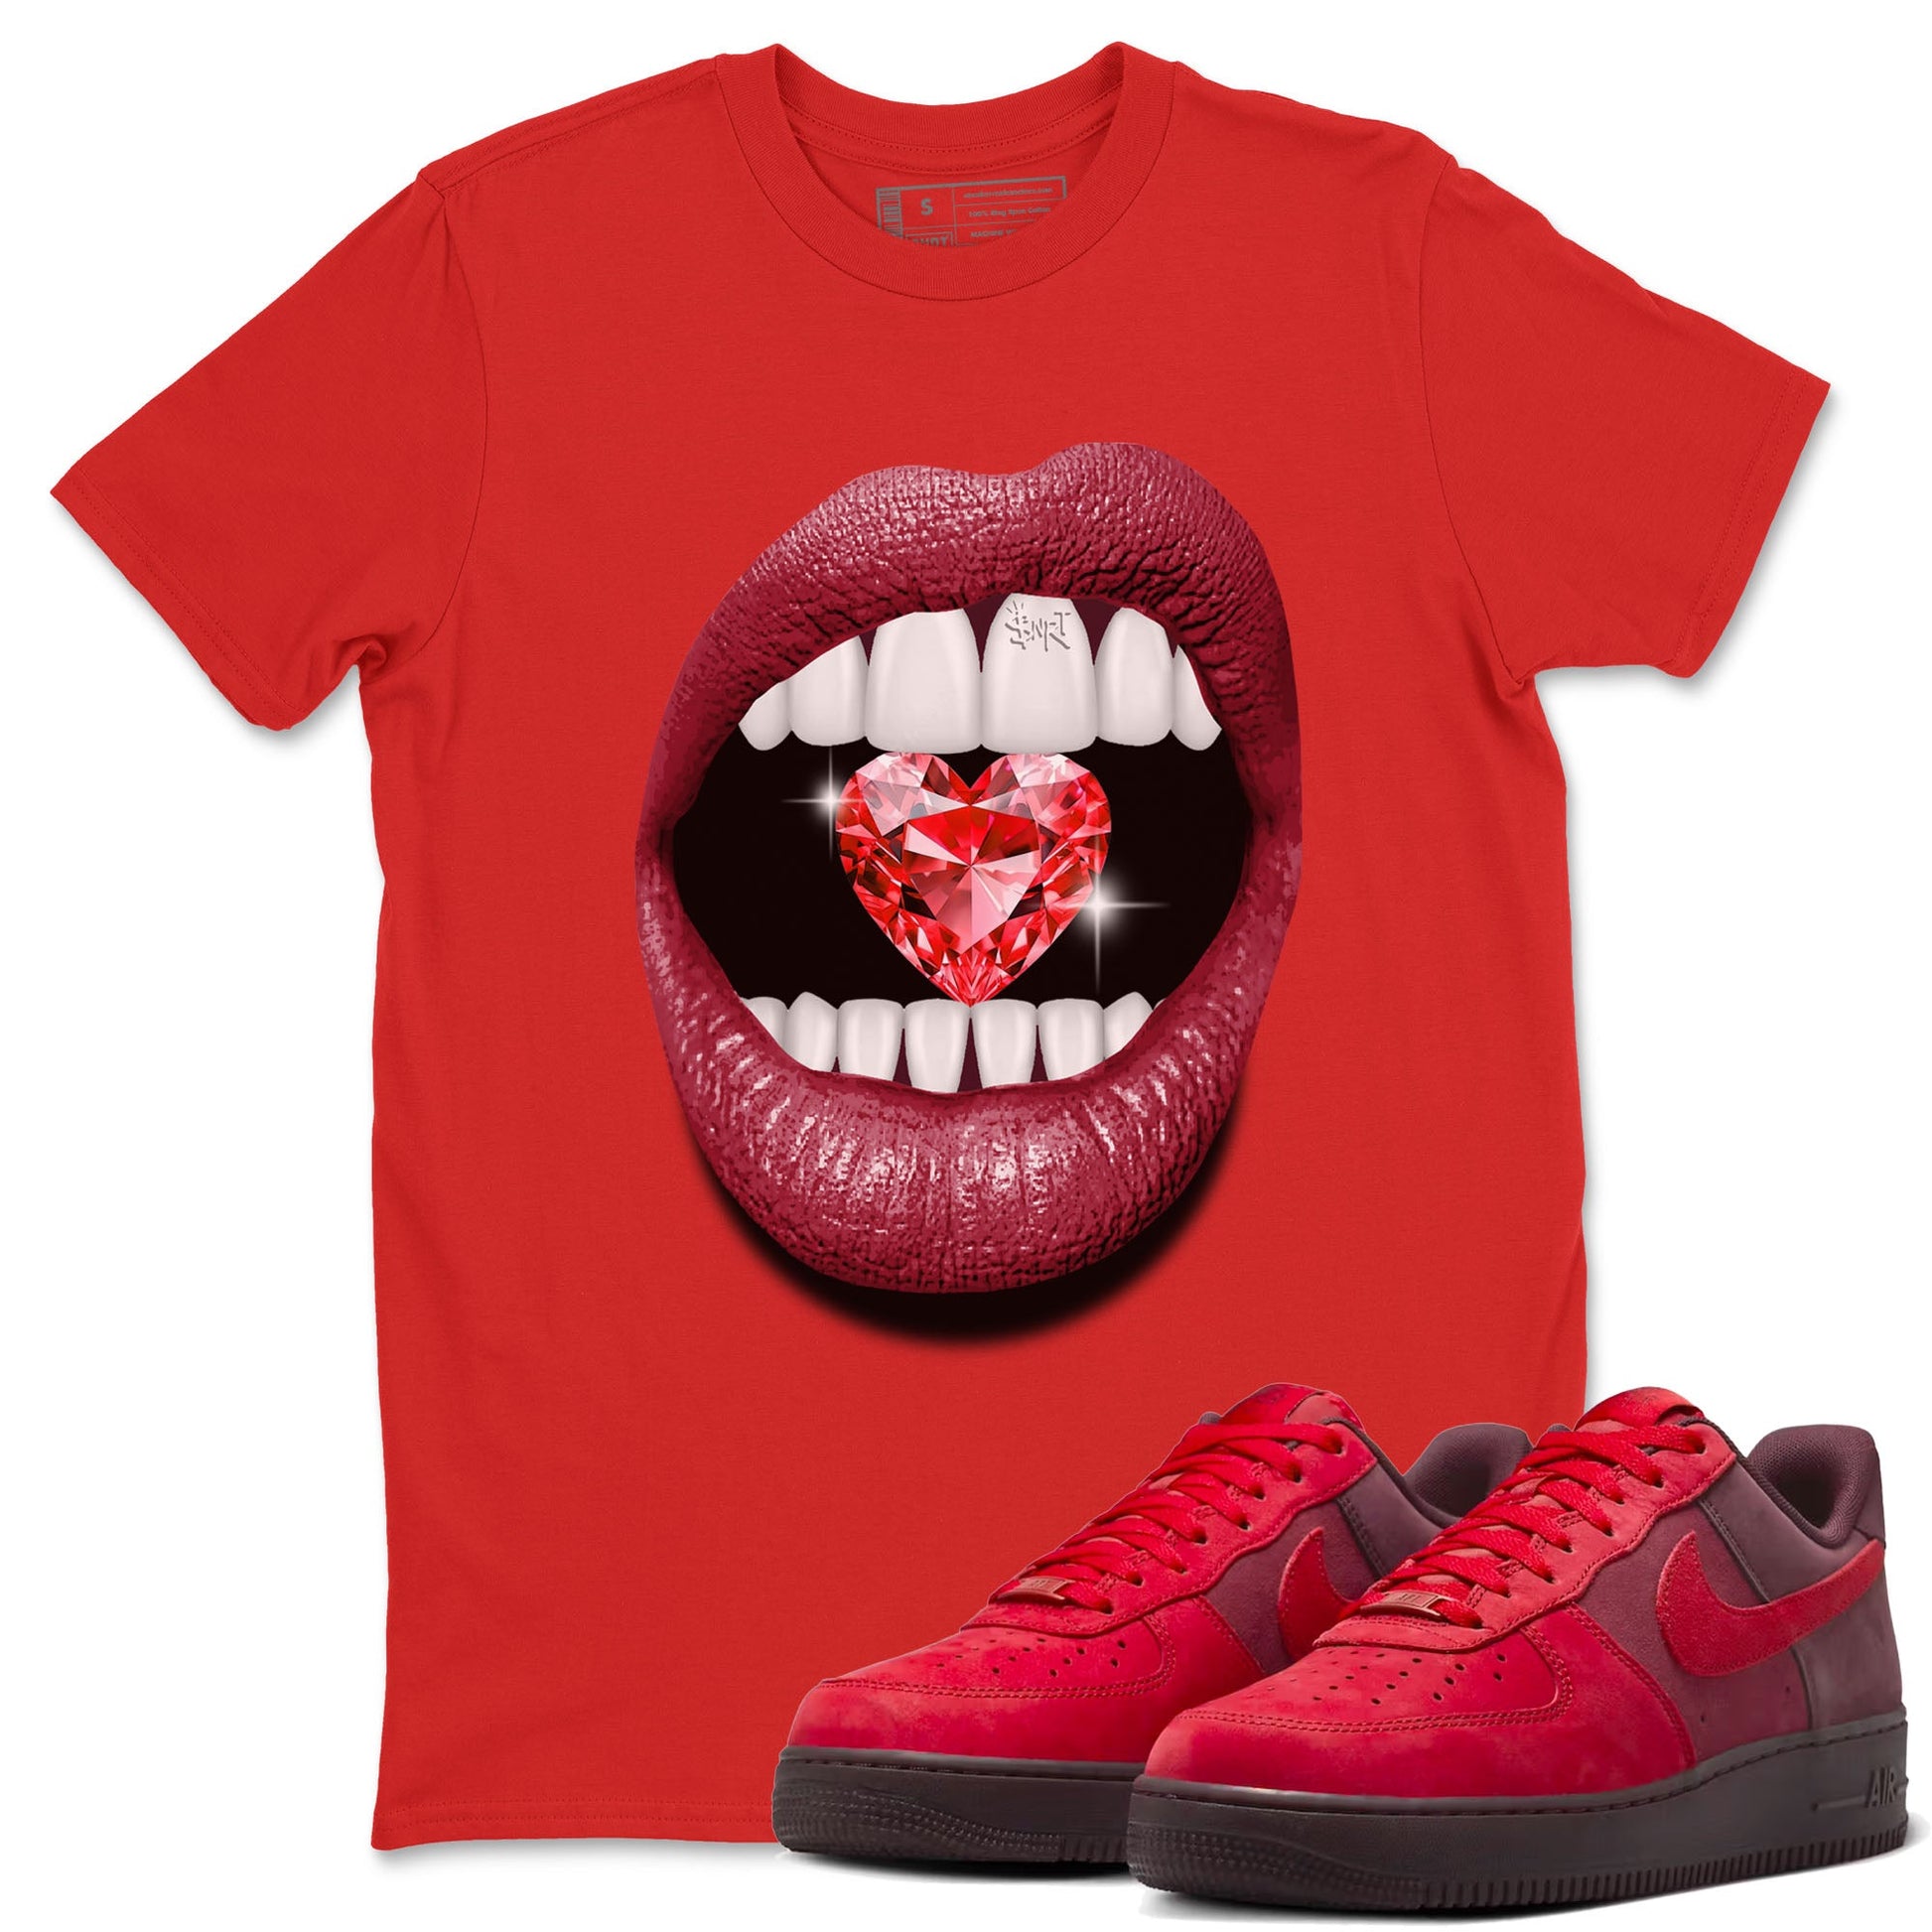 Lips Heart Diamond sneaker match tees to Special Valentine's Day street fashion brand for shirts to match Jordans SNRT Sneaker Tees Air Force 1 Valentines Day unisex t-shirt Red 1 unisex shirt